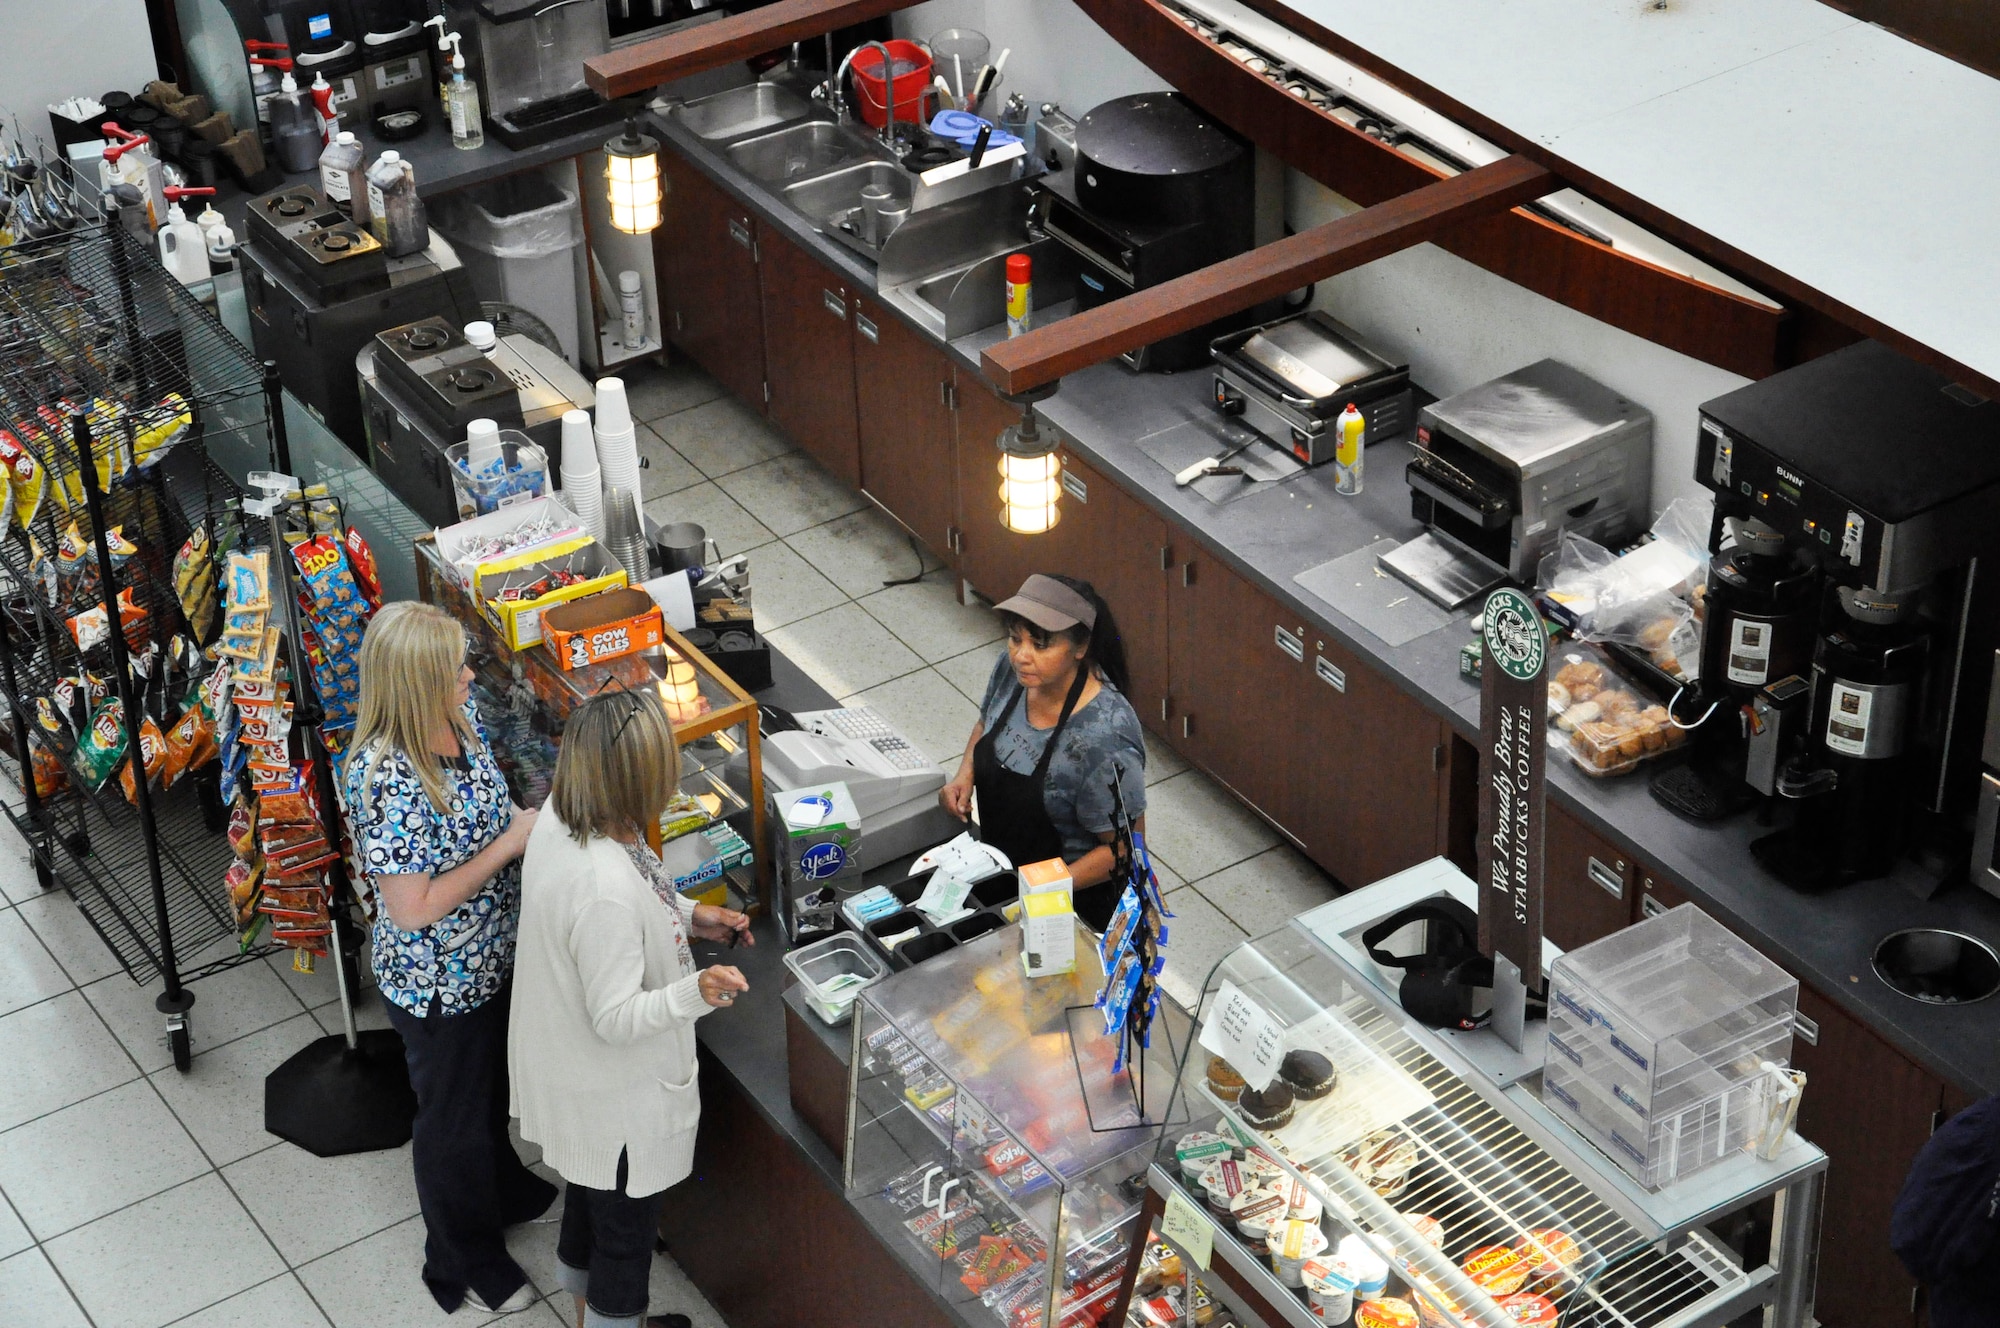 Located inside the 711th Human Performance Wing, Bldg. 840, on Area B of Wright-Patterson Air Force Base is Johnny Mac Inc., a breakfast and lunch café that also serves Starbucks coffee. The café is open 7 a.m.-2 p.m. (U.S. Air Force photo/Karina Brady)